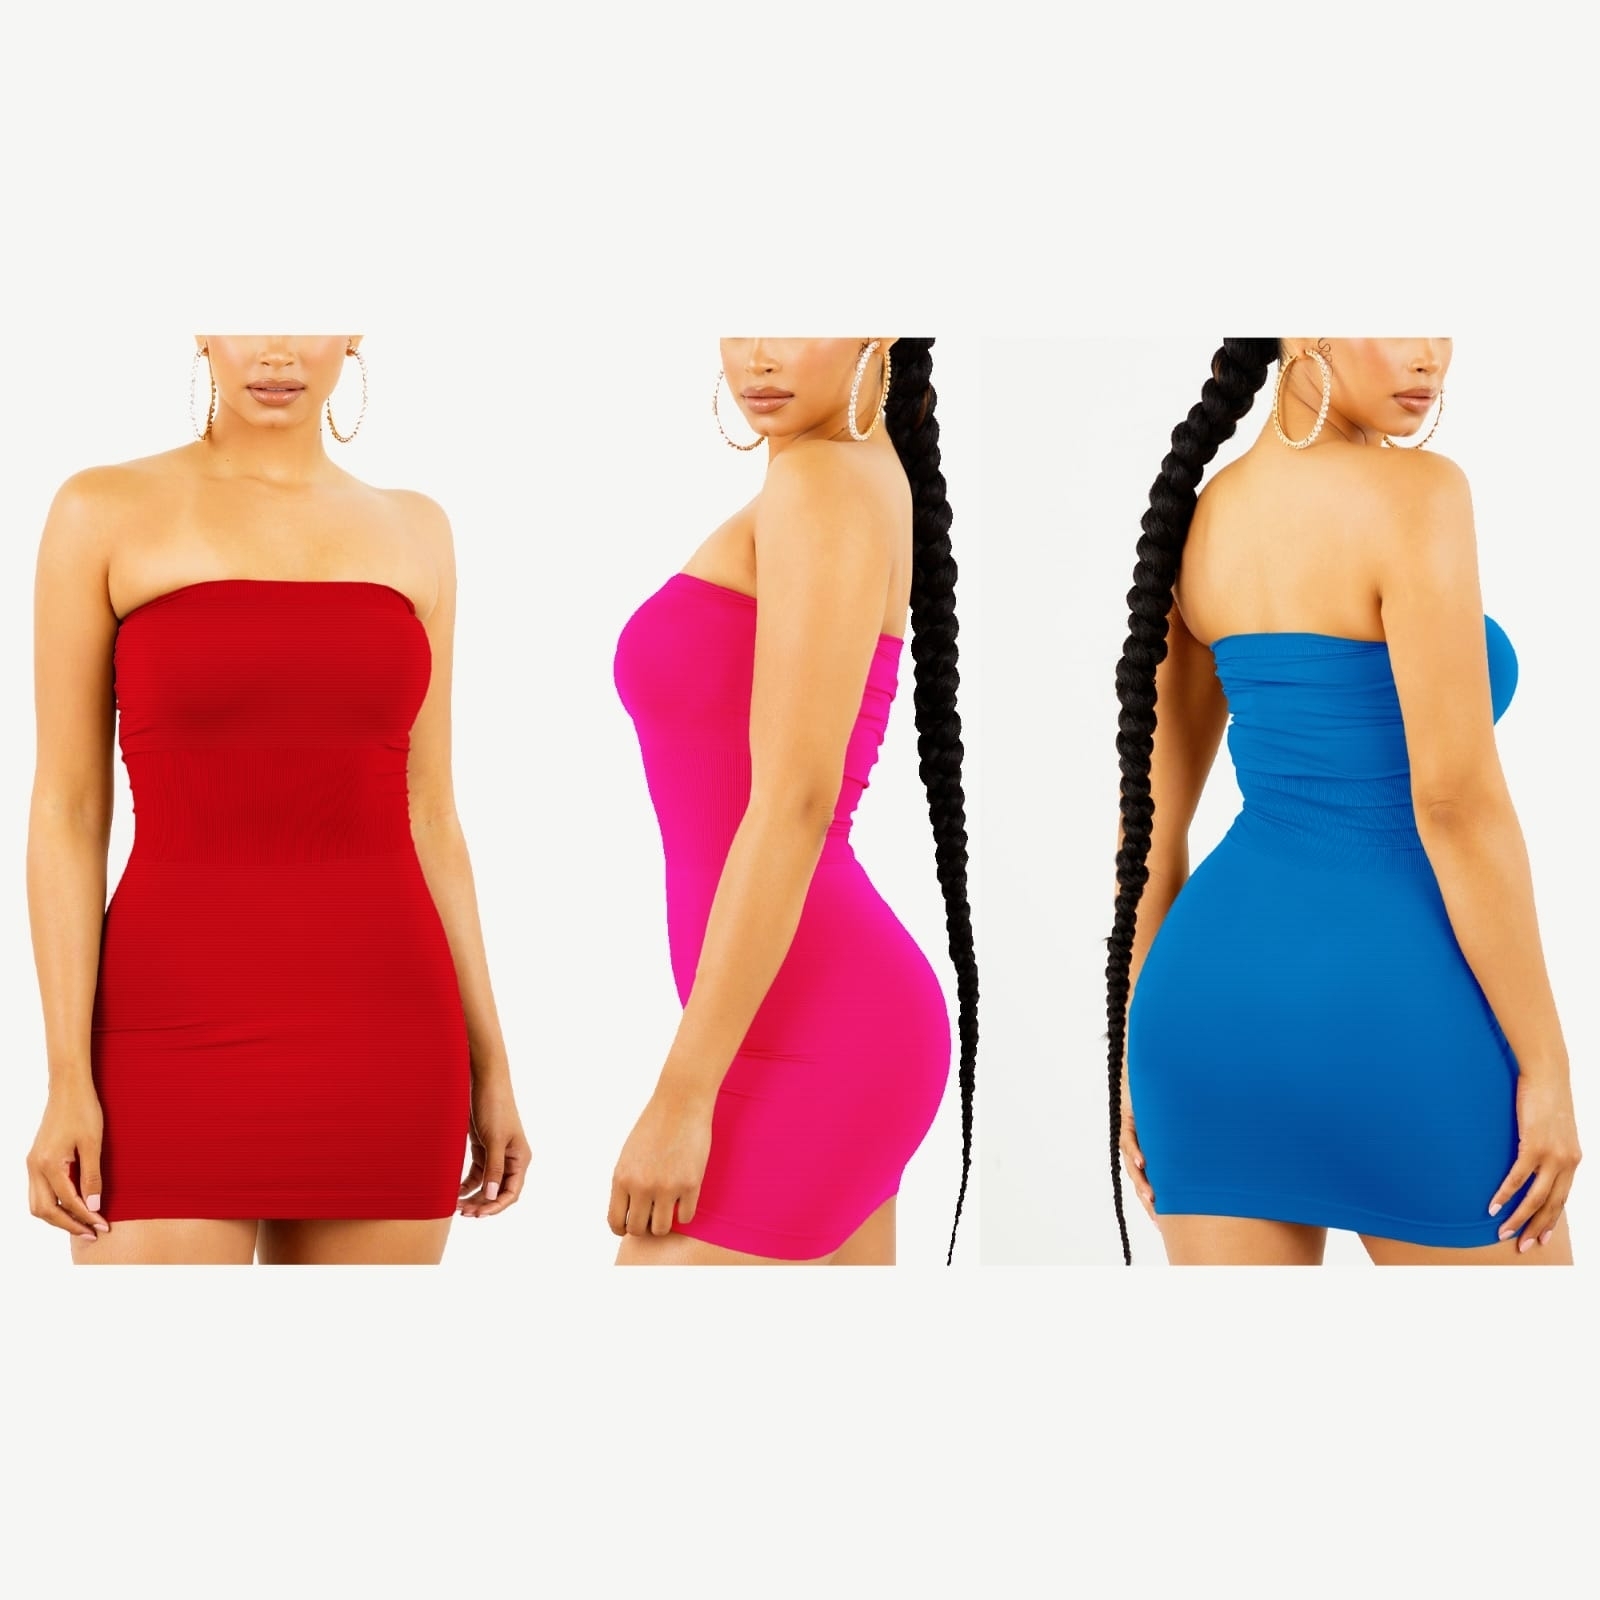 3-Pack Women's Strapless Stretchy Seamless Tight Fit Body Con Mini Tube Top Dress - PINK, M